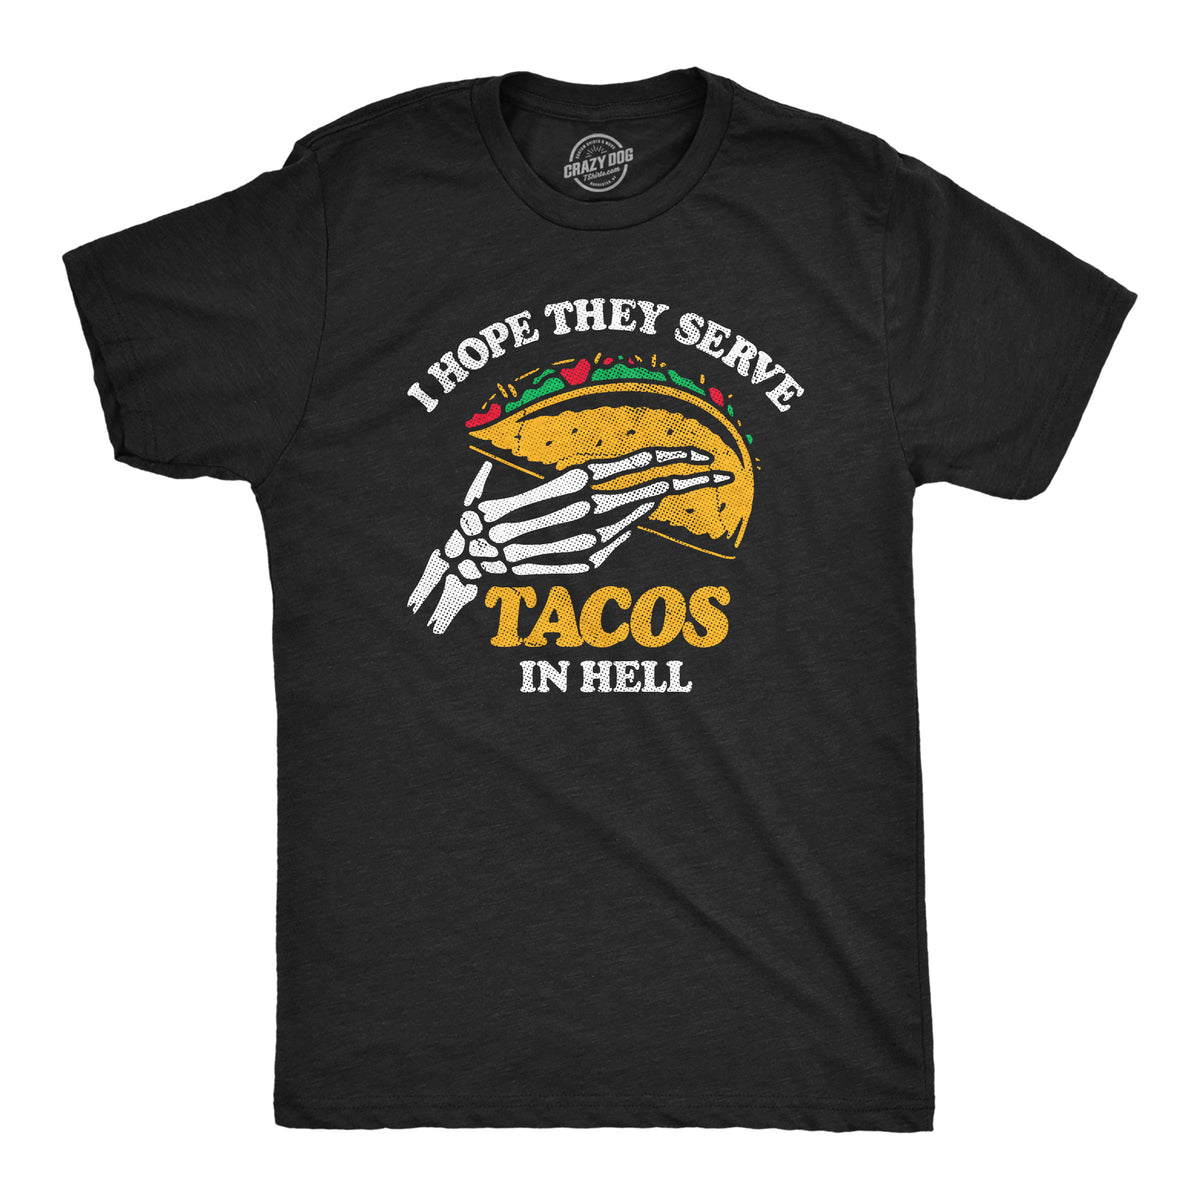 Funny Heather Black - TACOS I Hope They Serve Tacos In Hell Mens T Shirt Nerdy Food sarcastic Tee